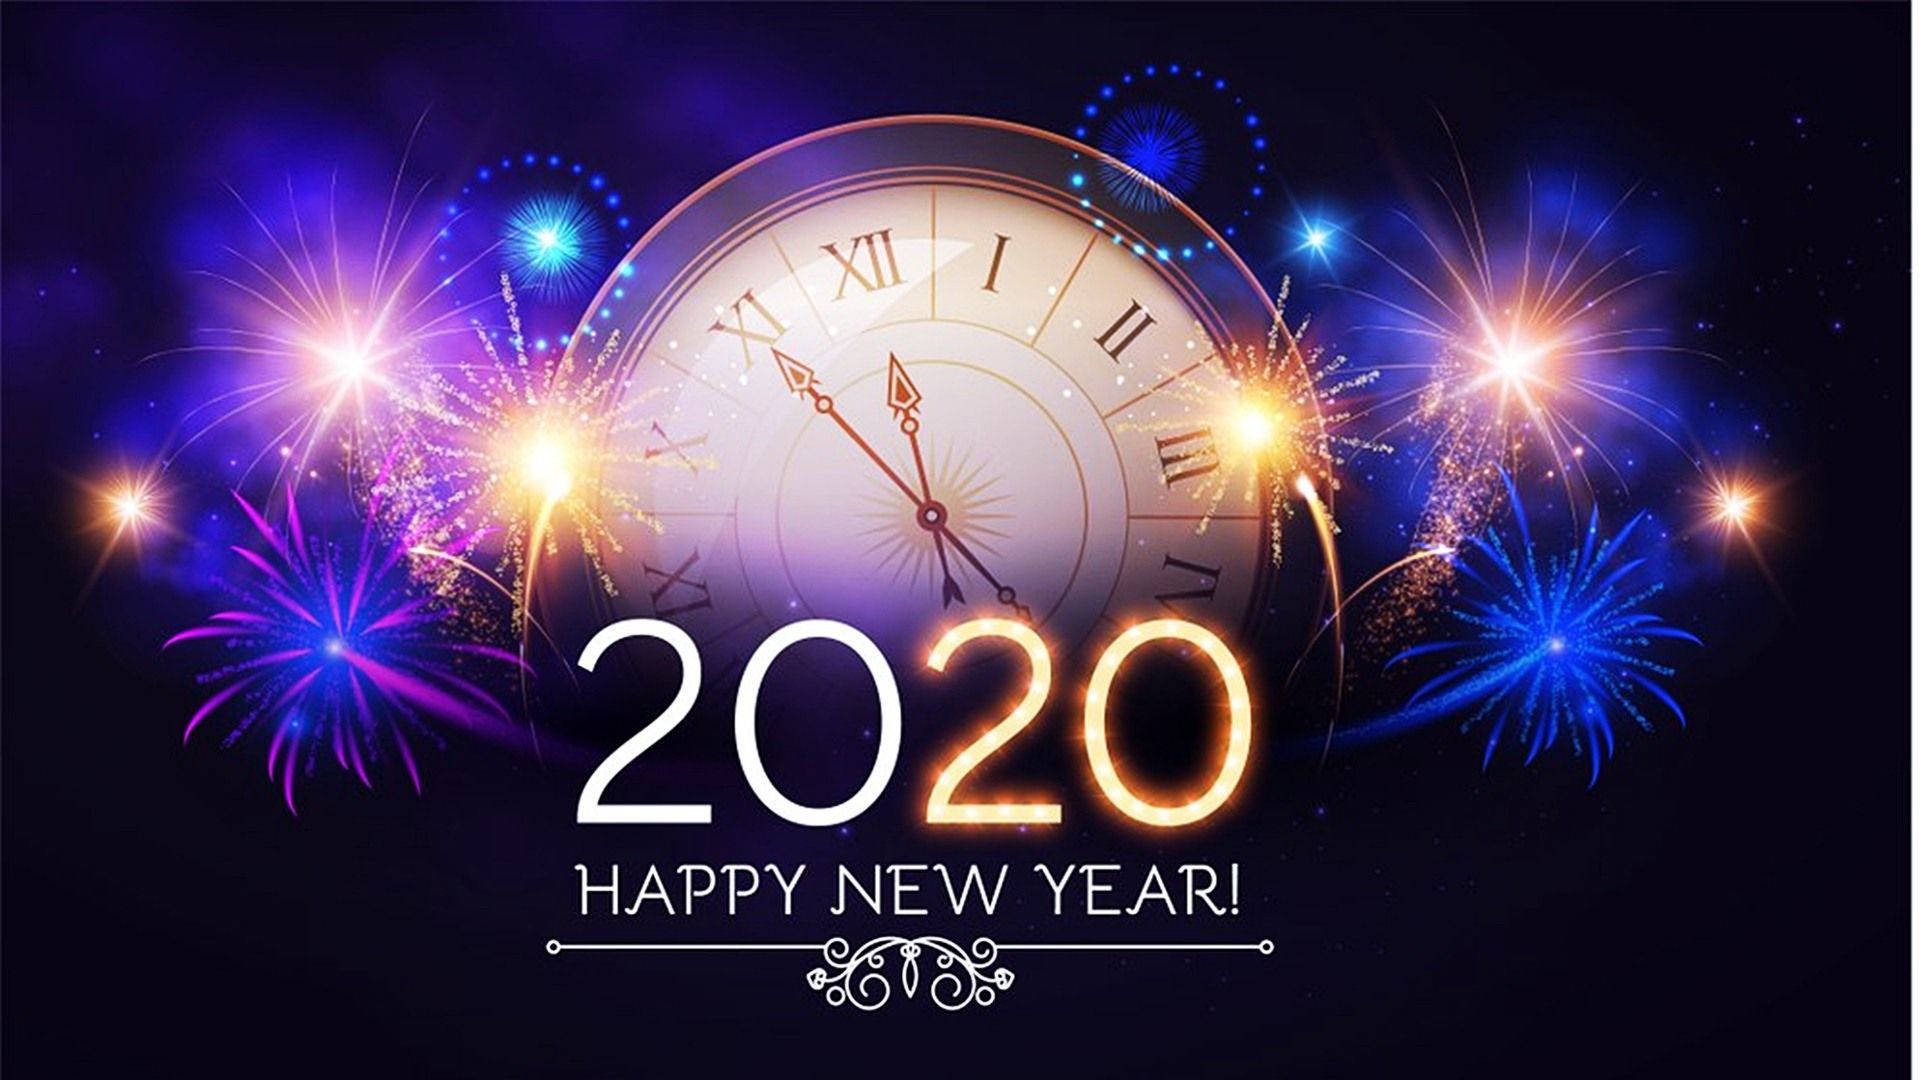 Wishing A Very Happy New Year 2020! Wallpaper